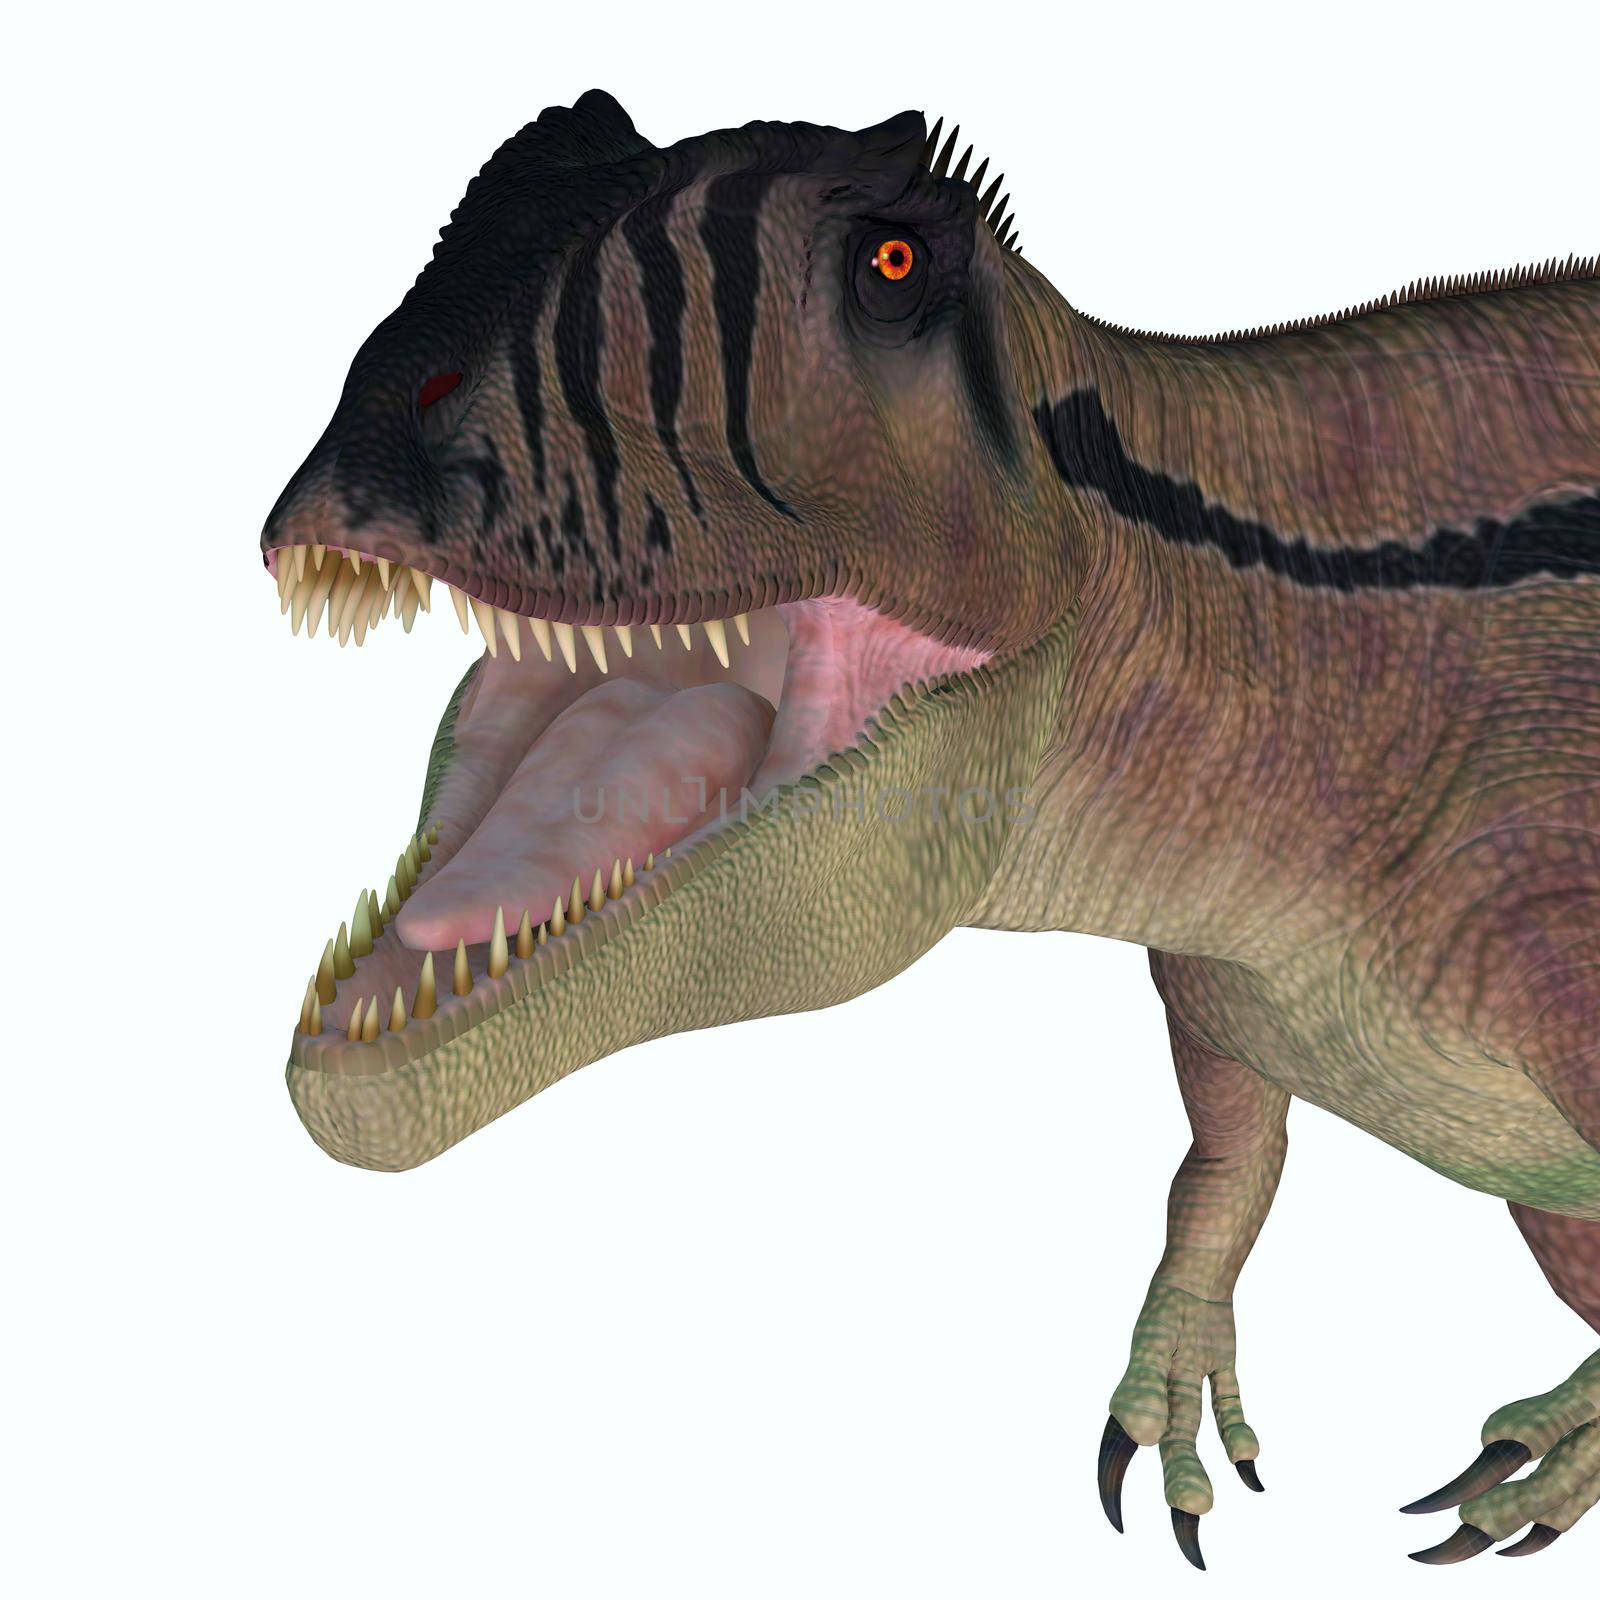 Carcharodontosaurus was a predatory theropod dinosaur in the Sahara, Africa during the Cretaceous Period.